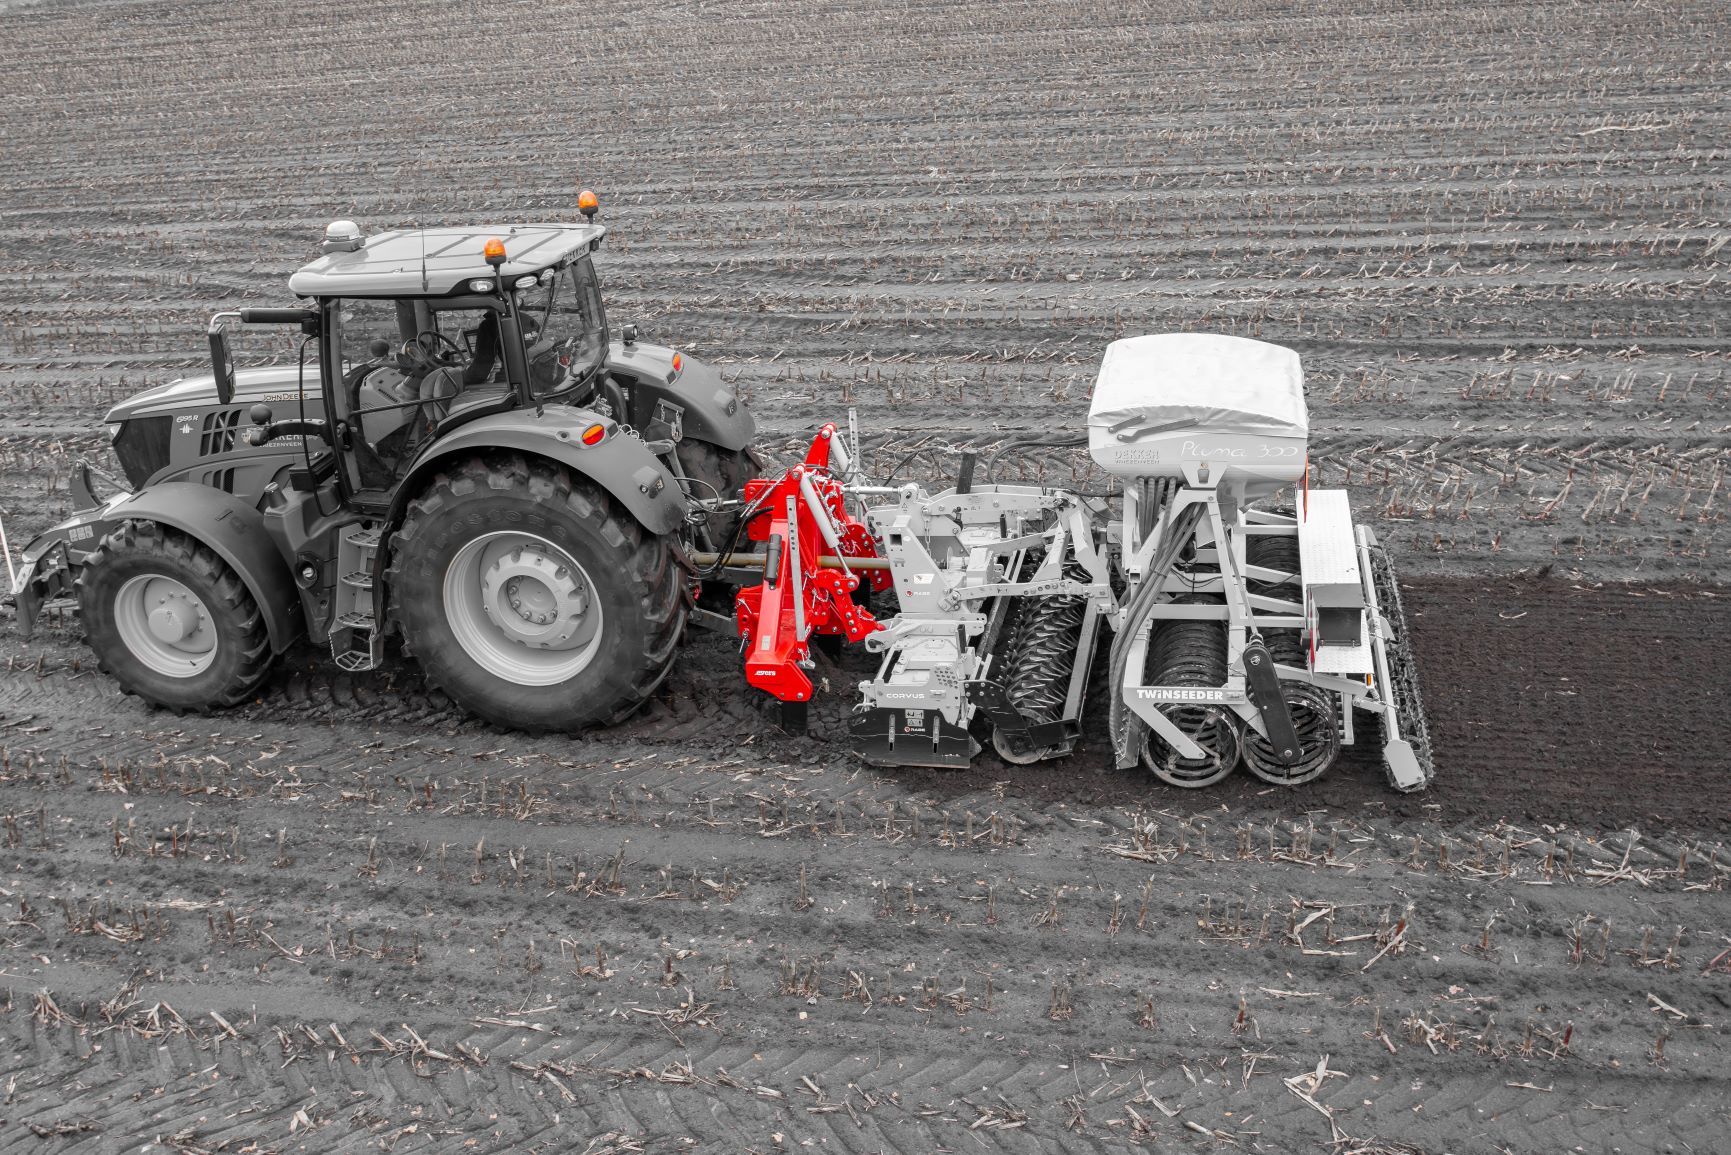 Evers machines for a healthy, vital soil : eliminate compaction and seeded preparation